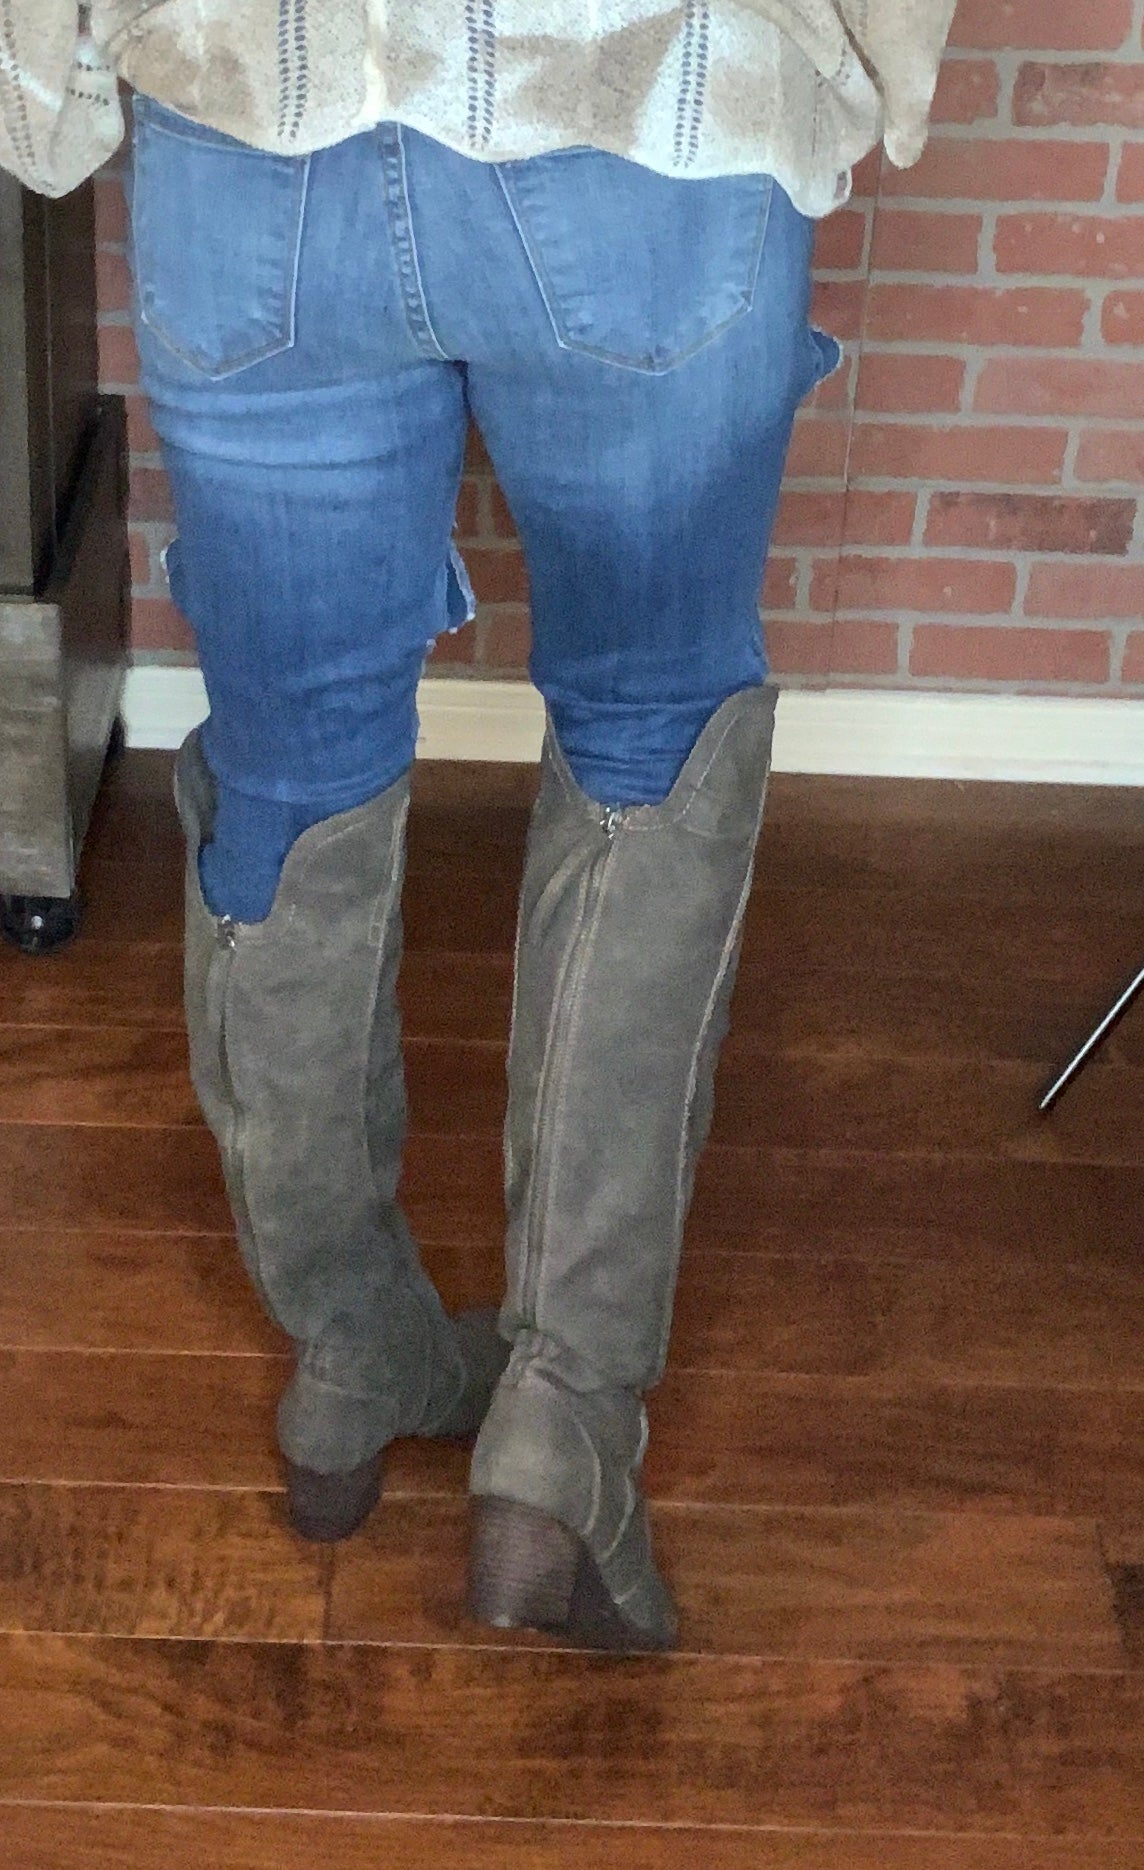 "Southern Belle" Over the Knee Boots